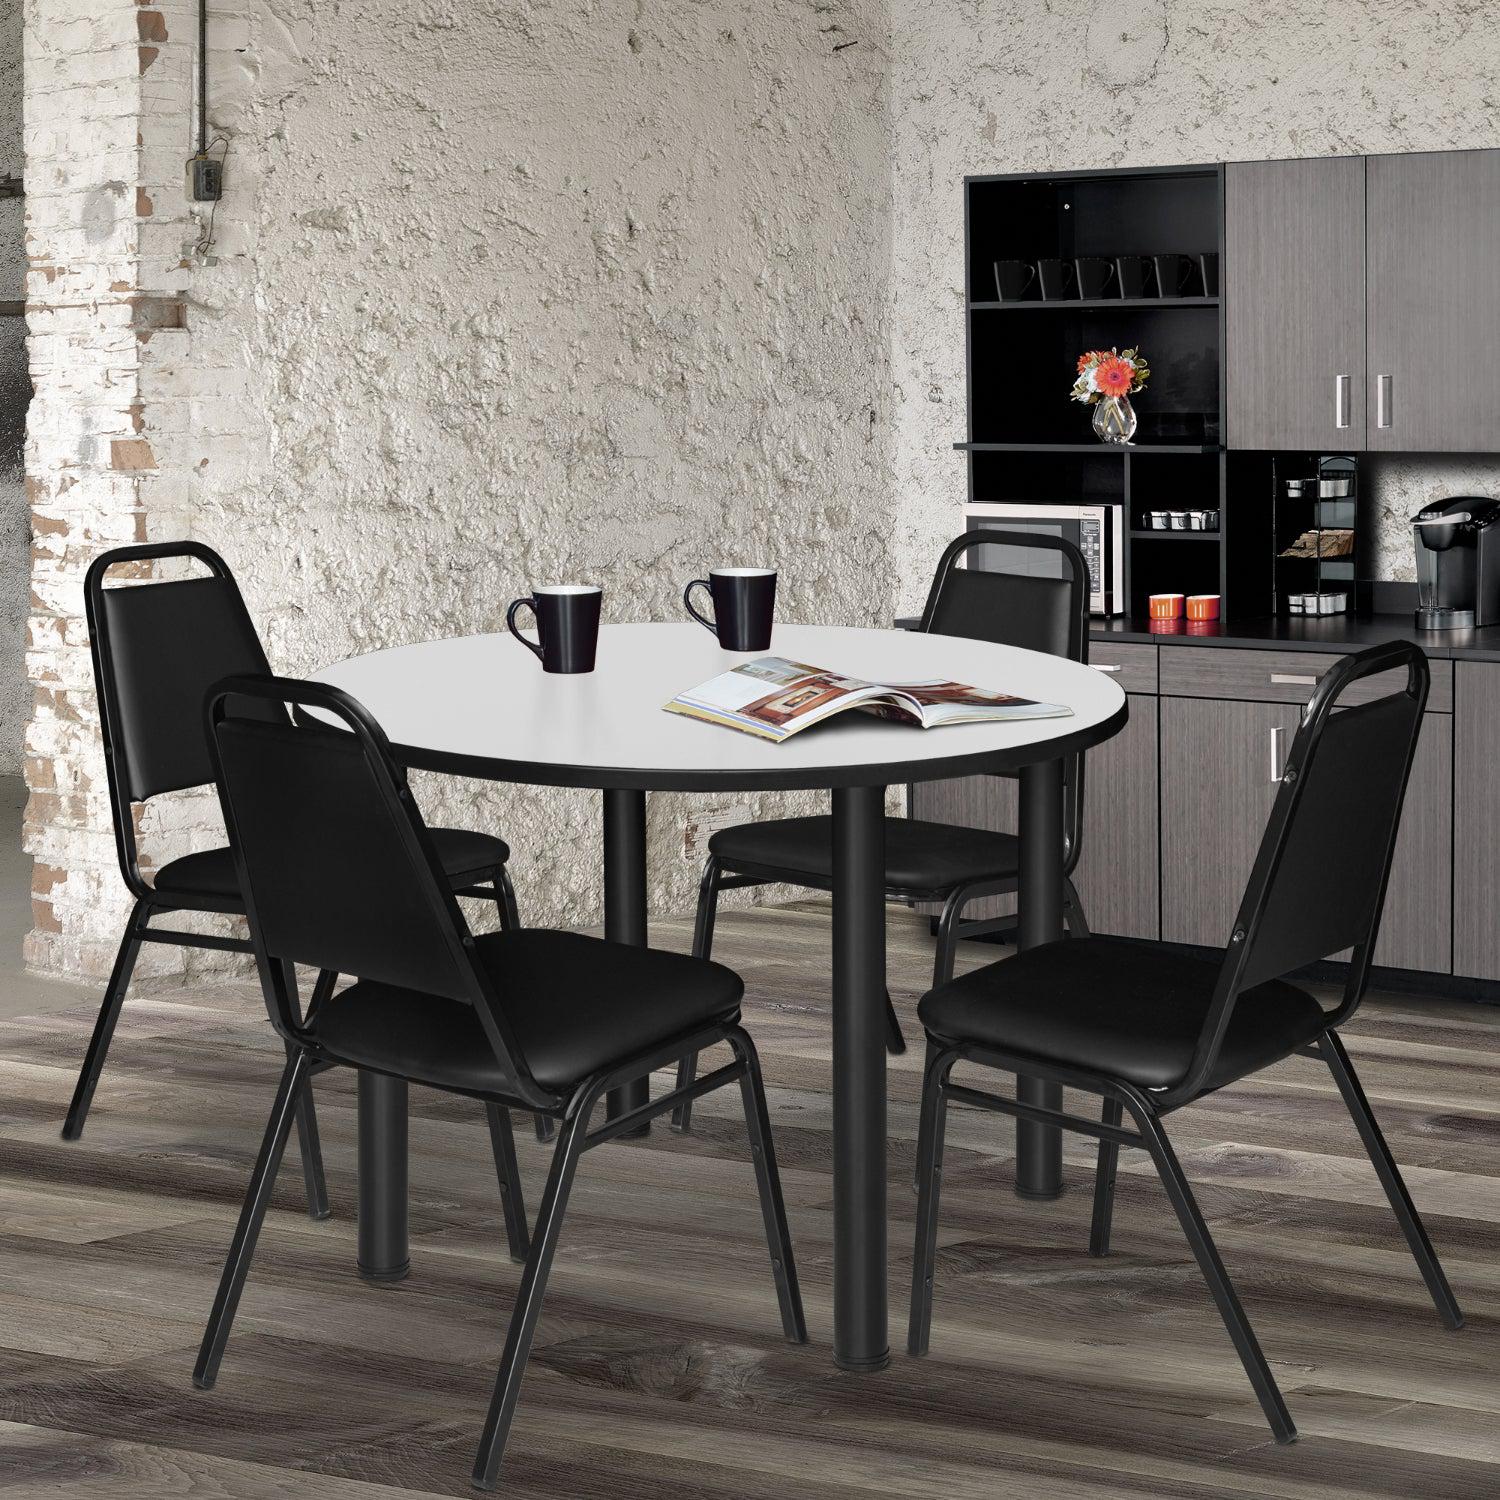 Kee Round Breakroom Table and Chair Package, Kee 48" Round Post-Leg Breakroom Table with 4 Restaurant Stack Chairs